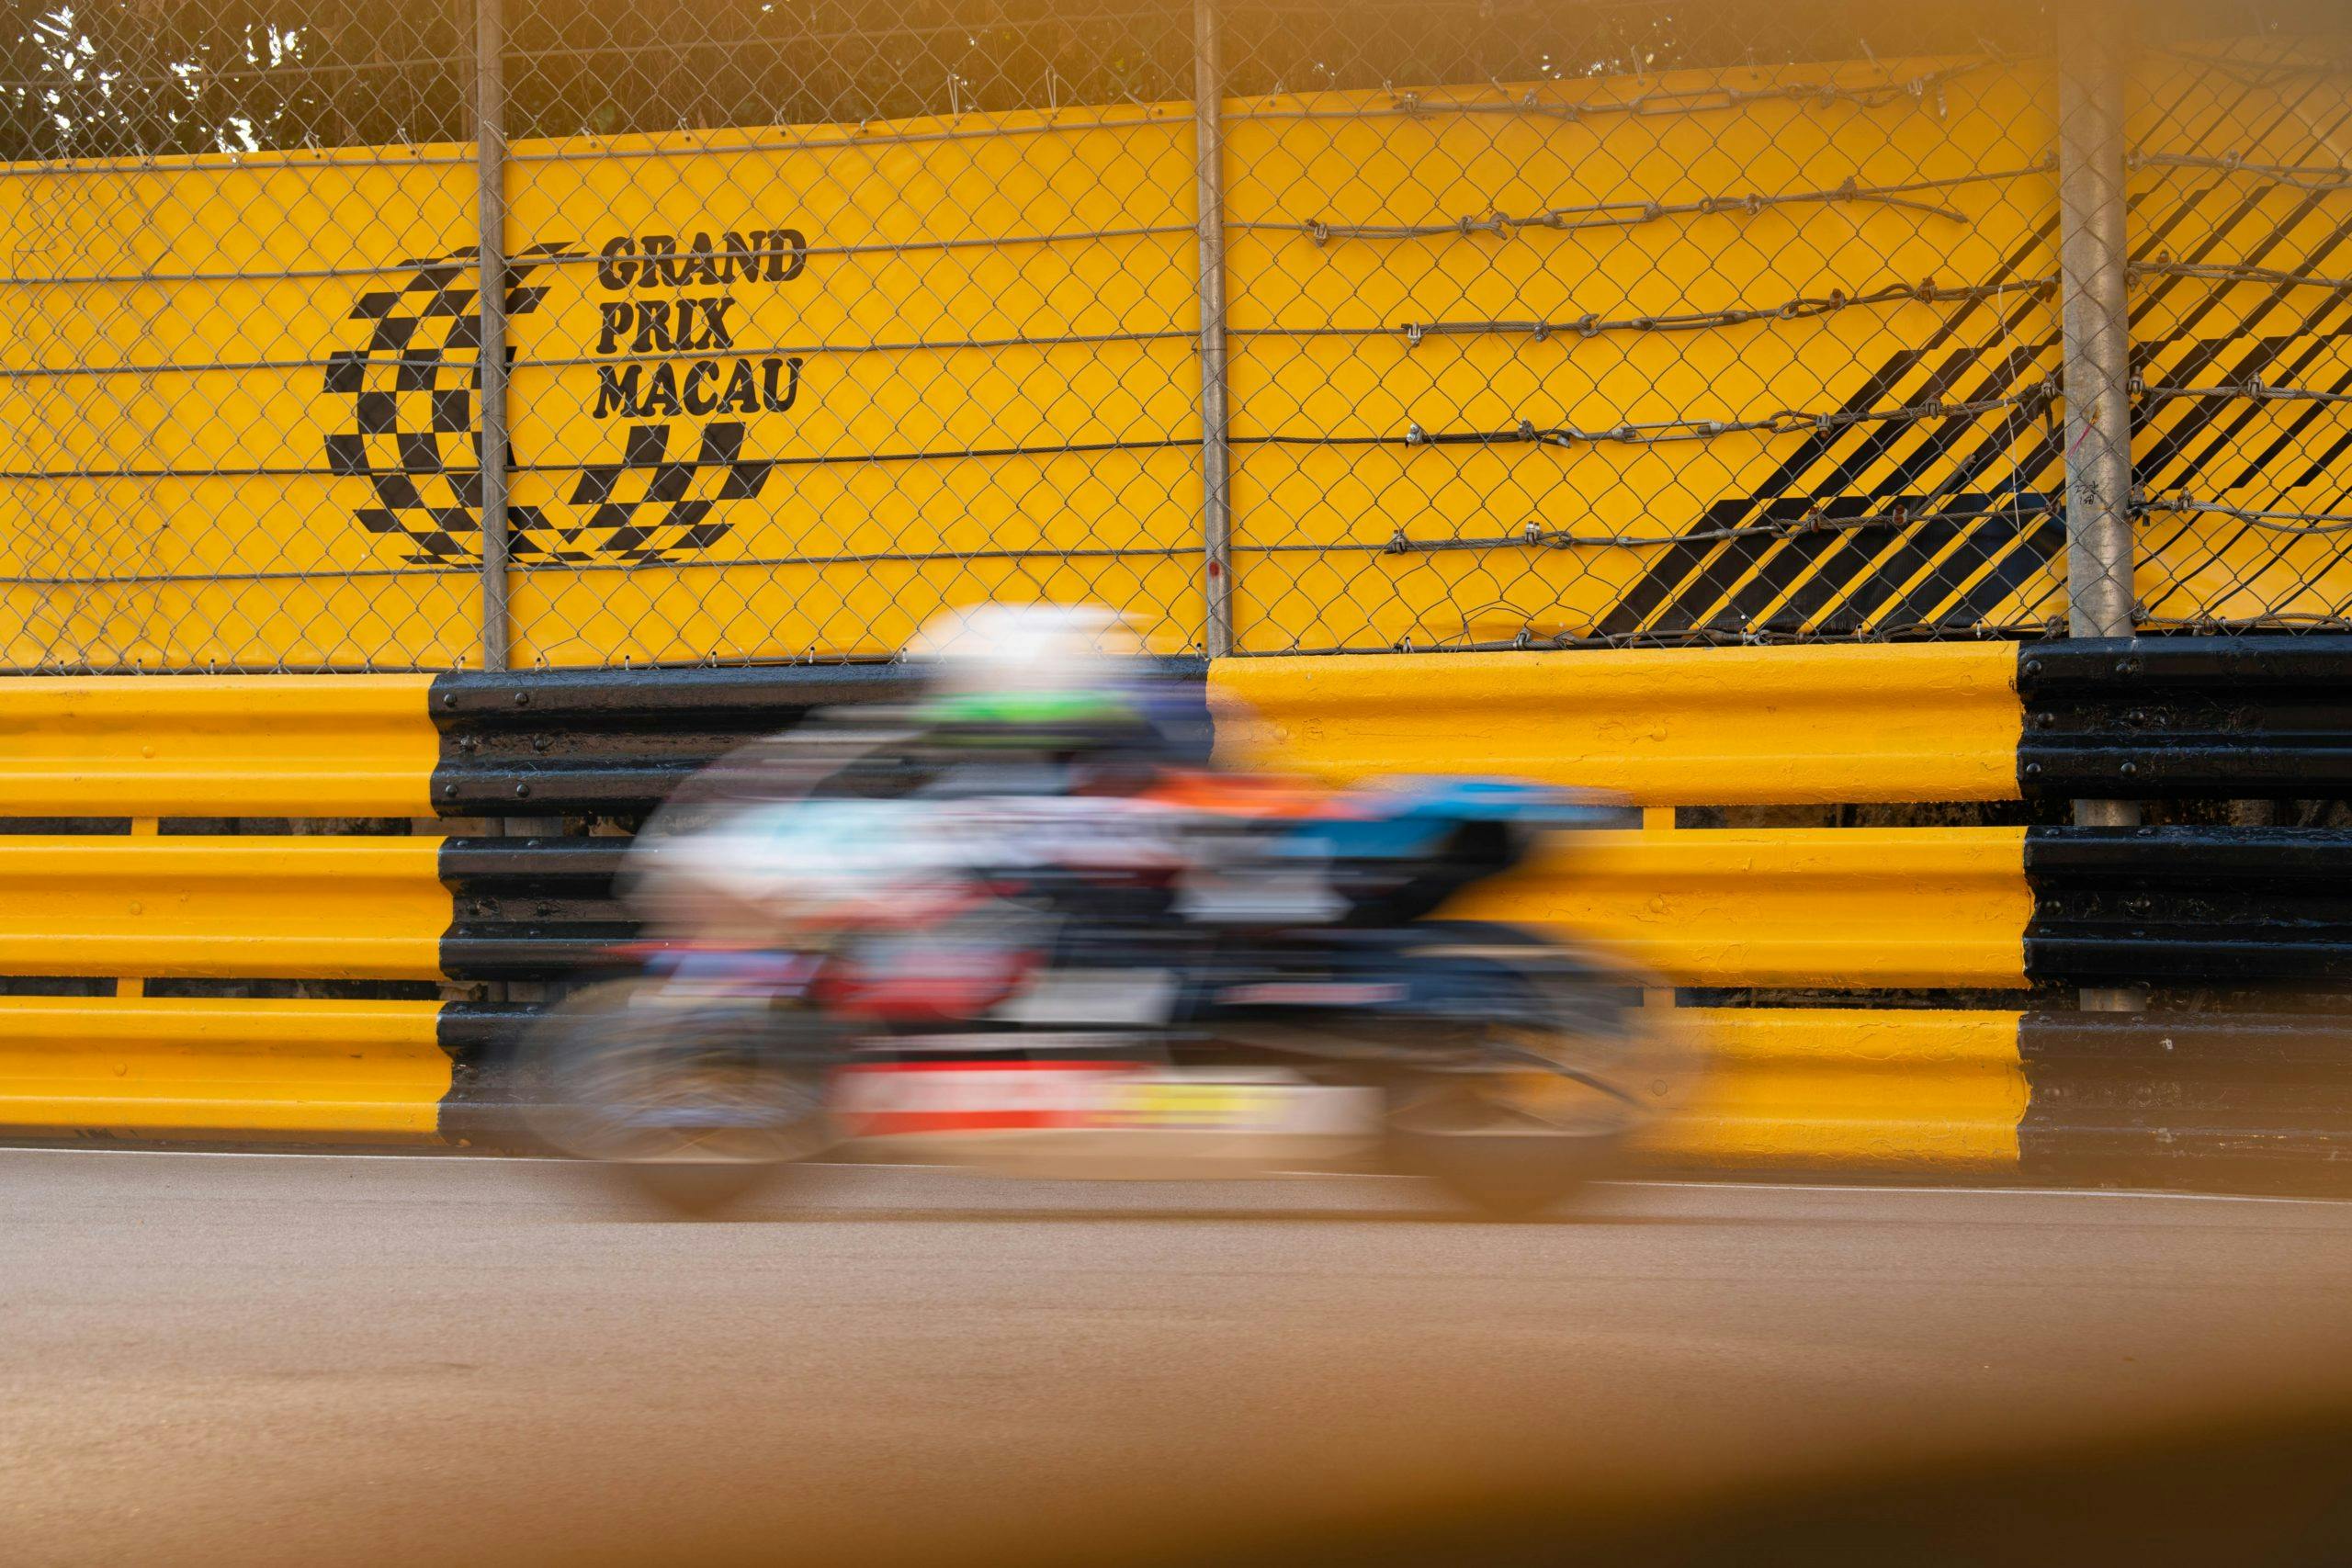 54th Macao Motorcycle Grand Prix practice session pan